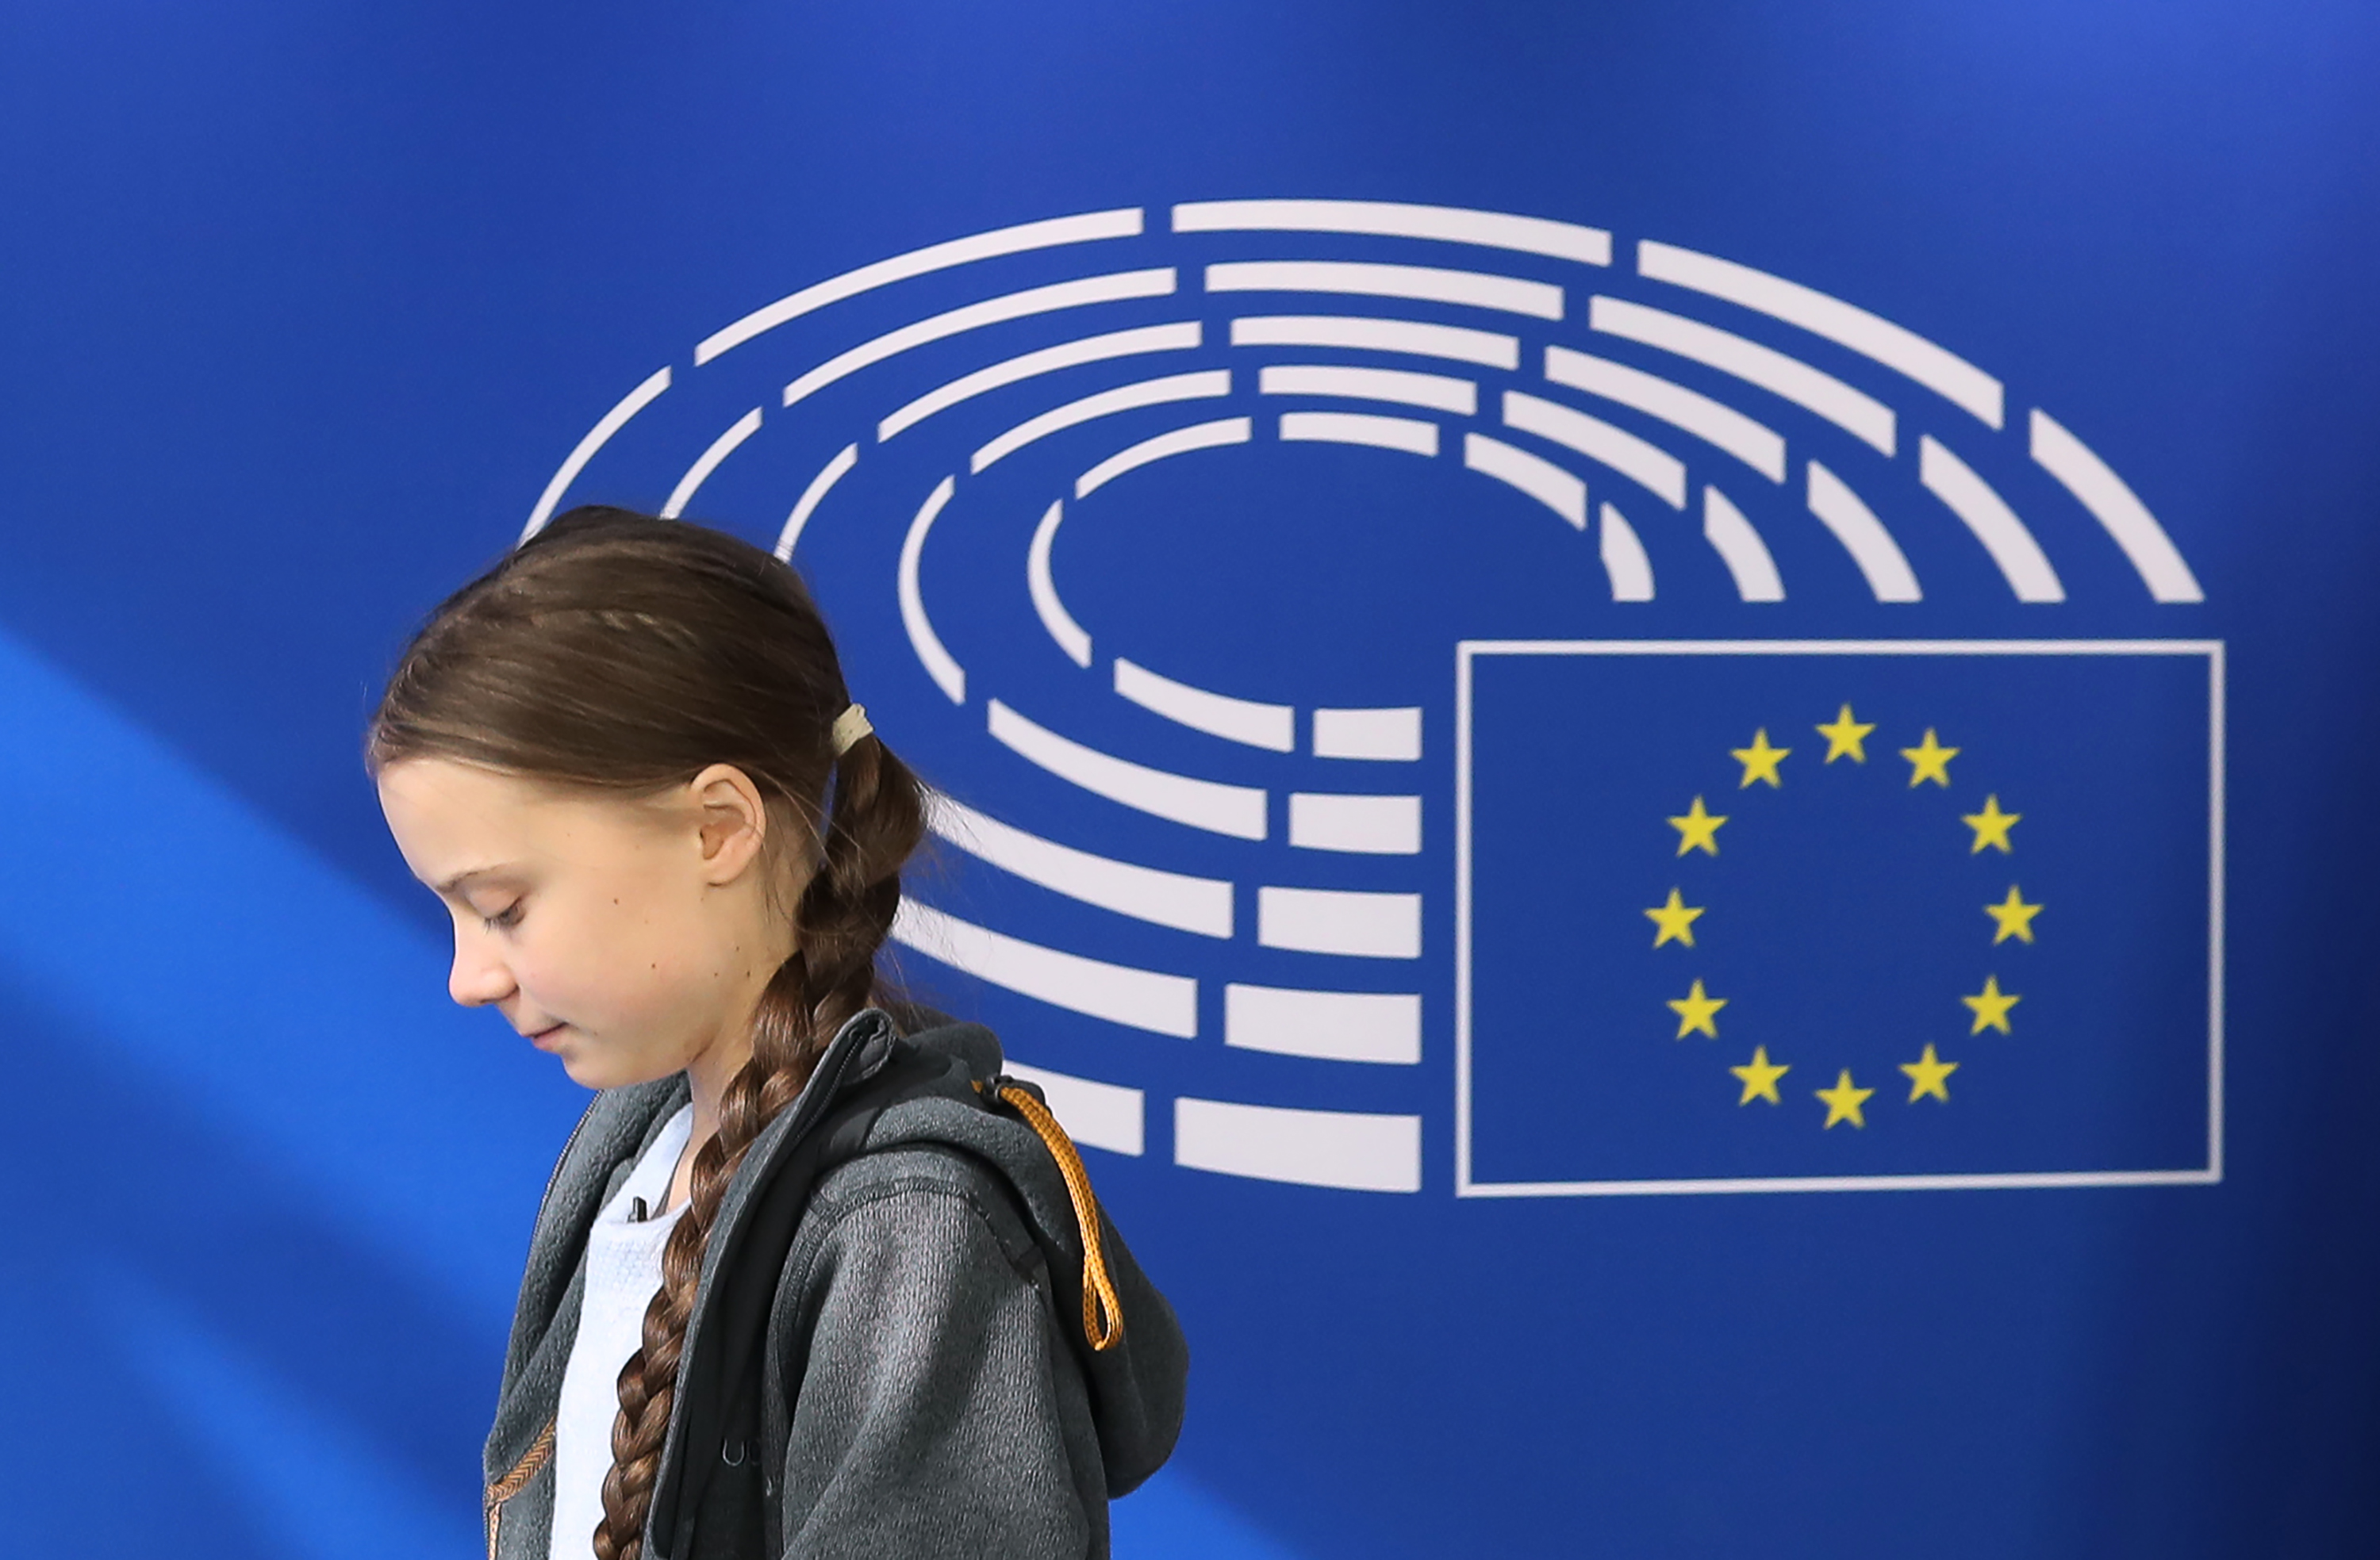 Greta Thunberg arrives at the European Parliament in Brussels on March 4, 2020, on the day the European Union unveiled a landmark law to achieve "climate neutrality" by 2050. (Kenzo Tribouillard—AFP/Getty Images)